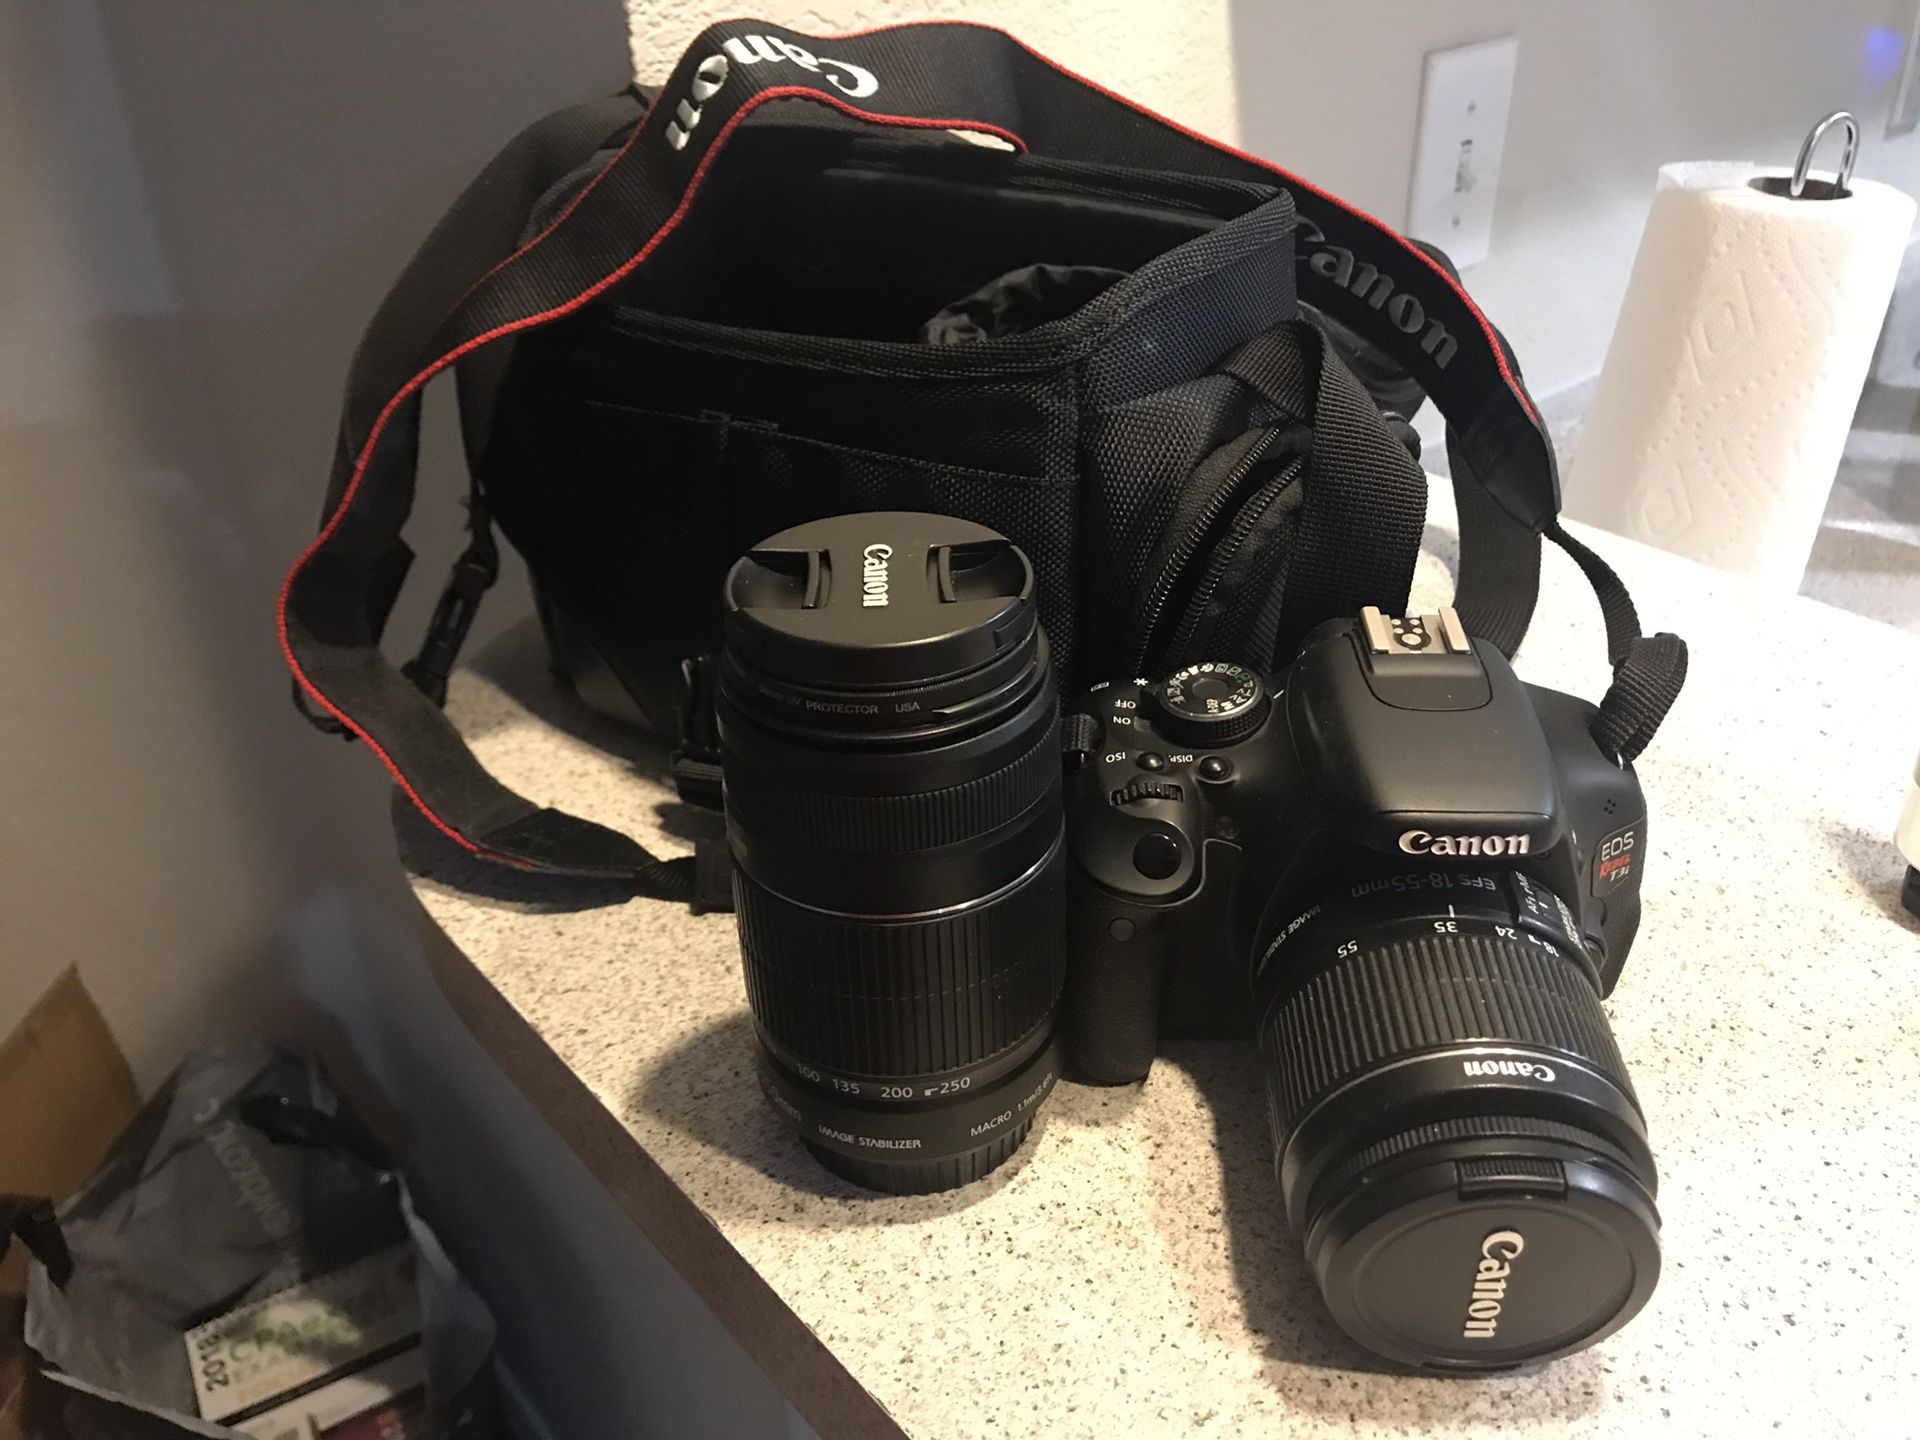 Canon t3i dslr with kit lens and 55-250mm lens